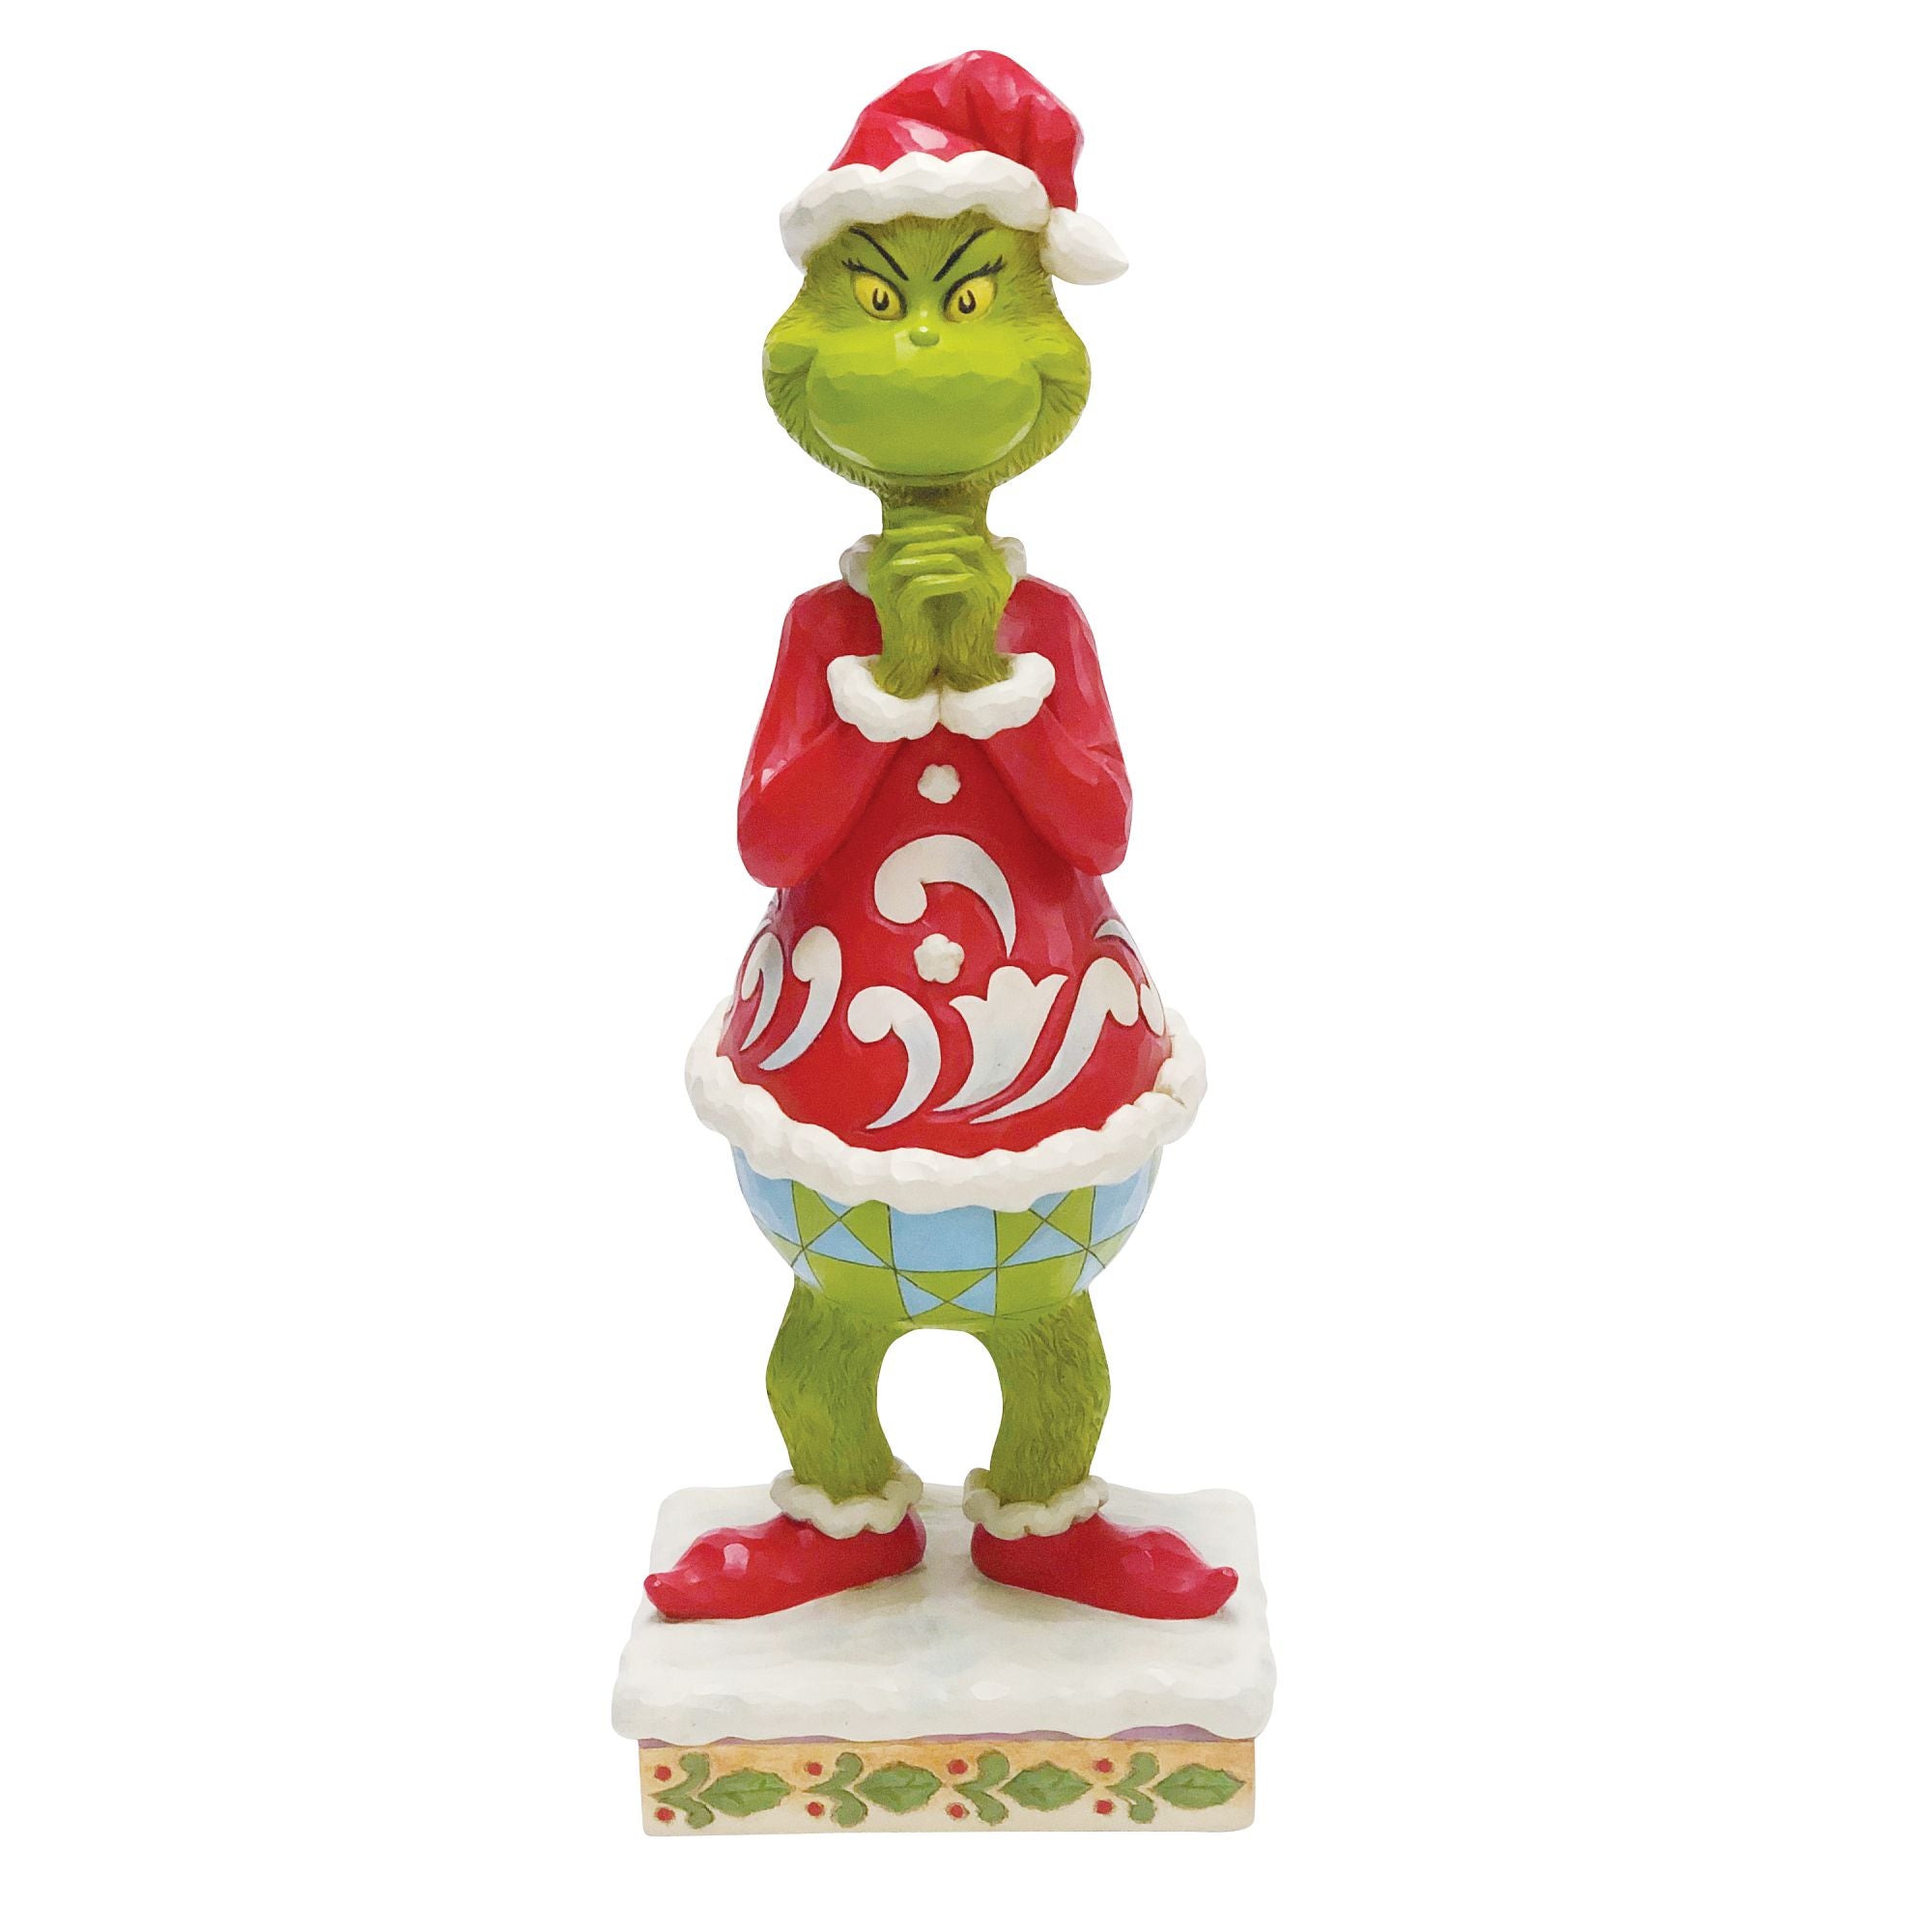 Grinch w/Hands Clenched Statue